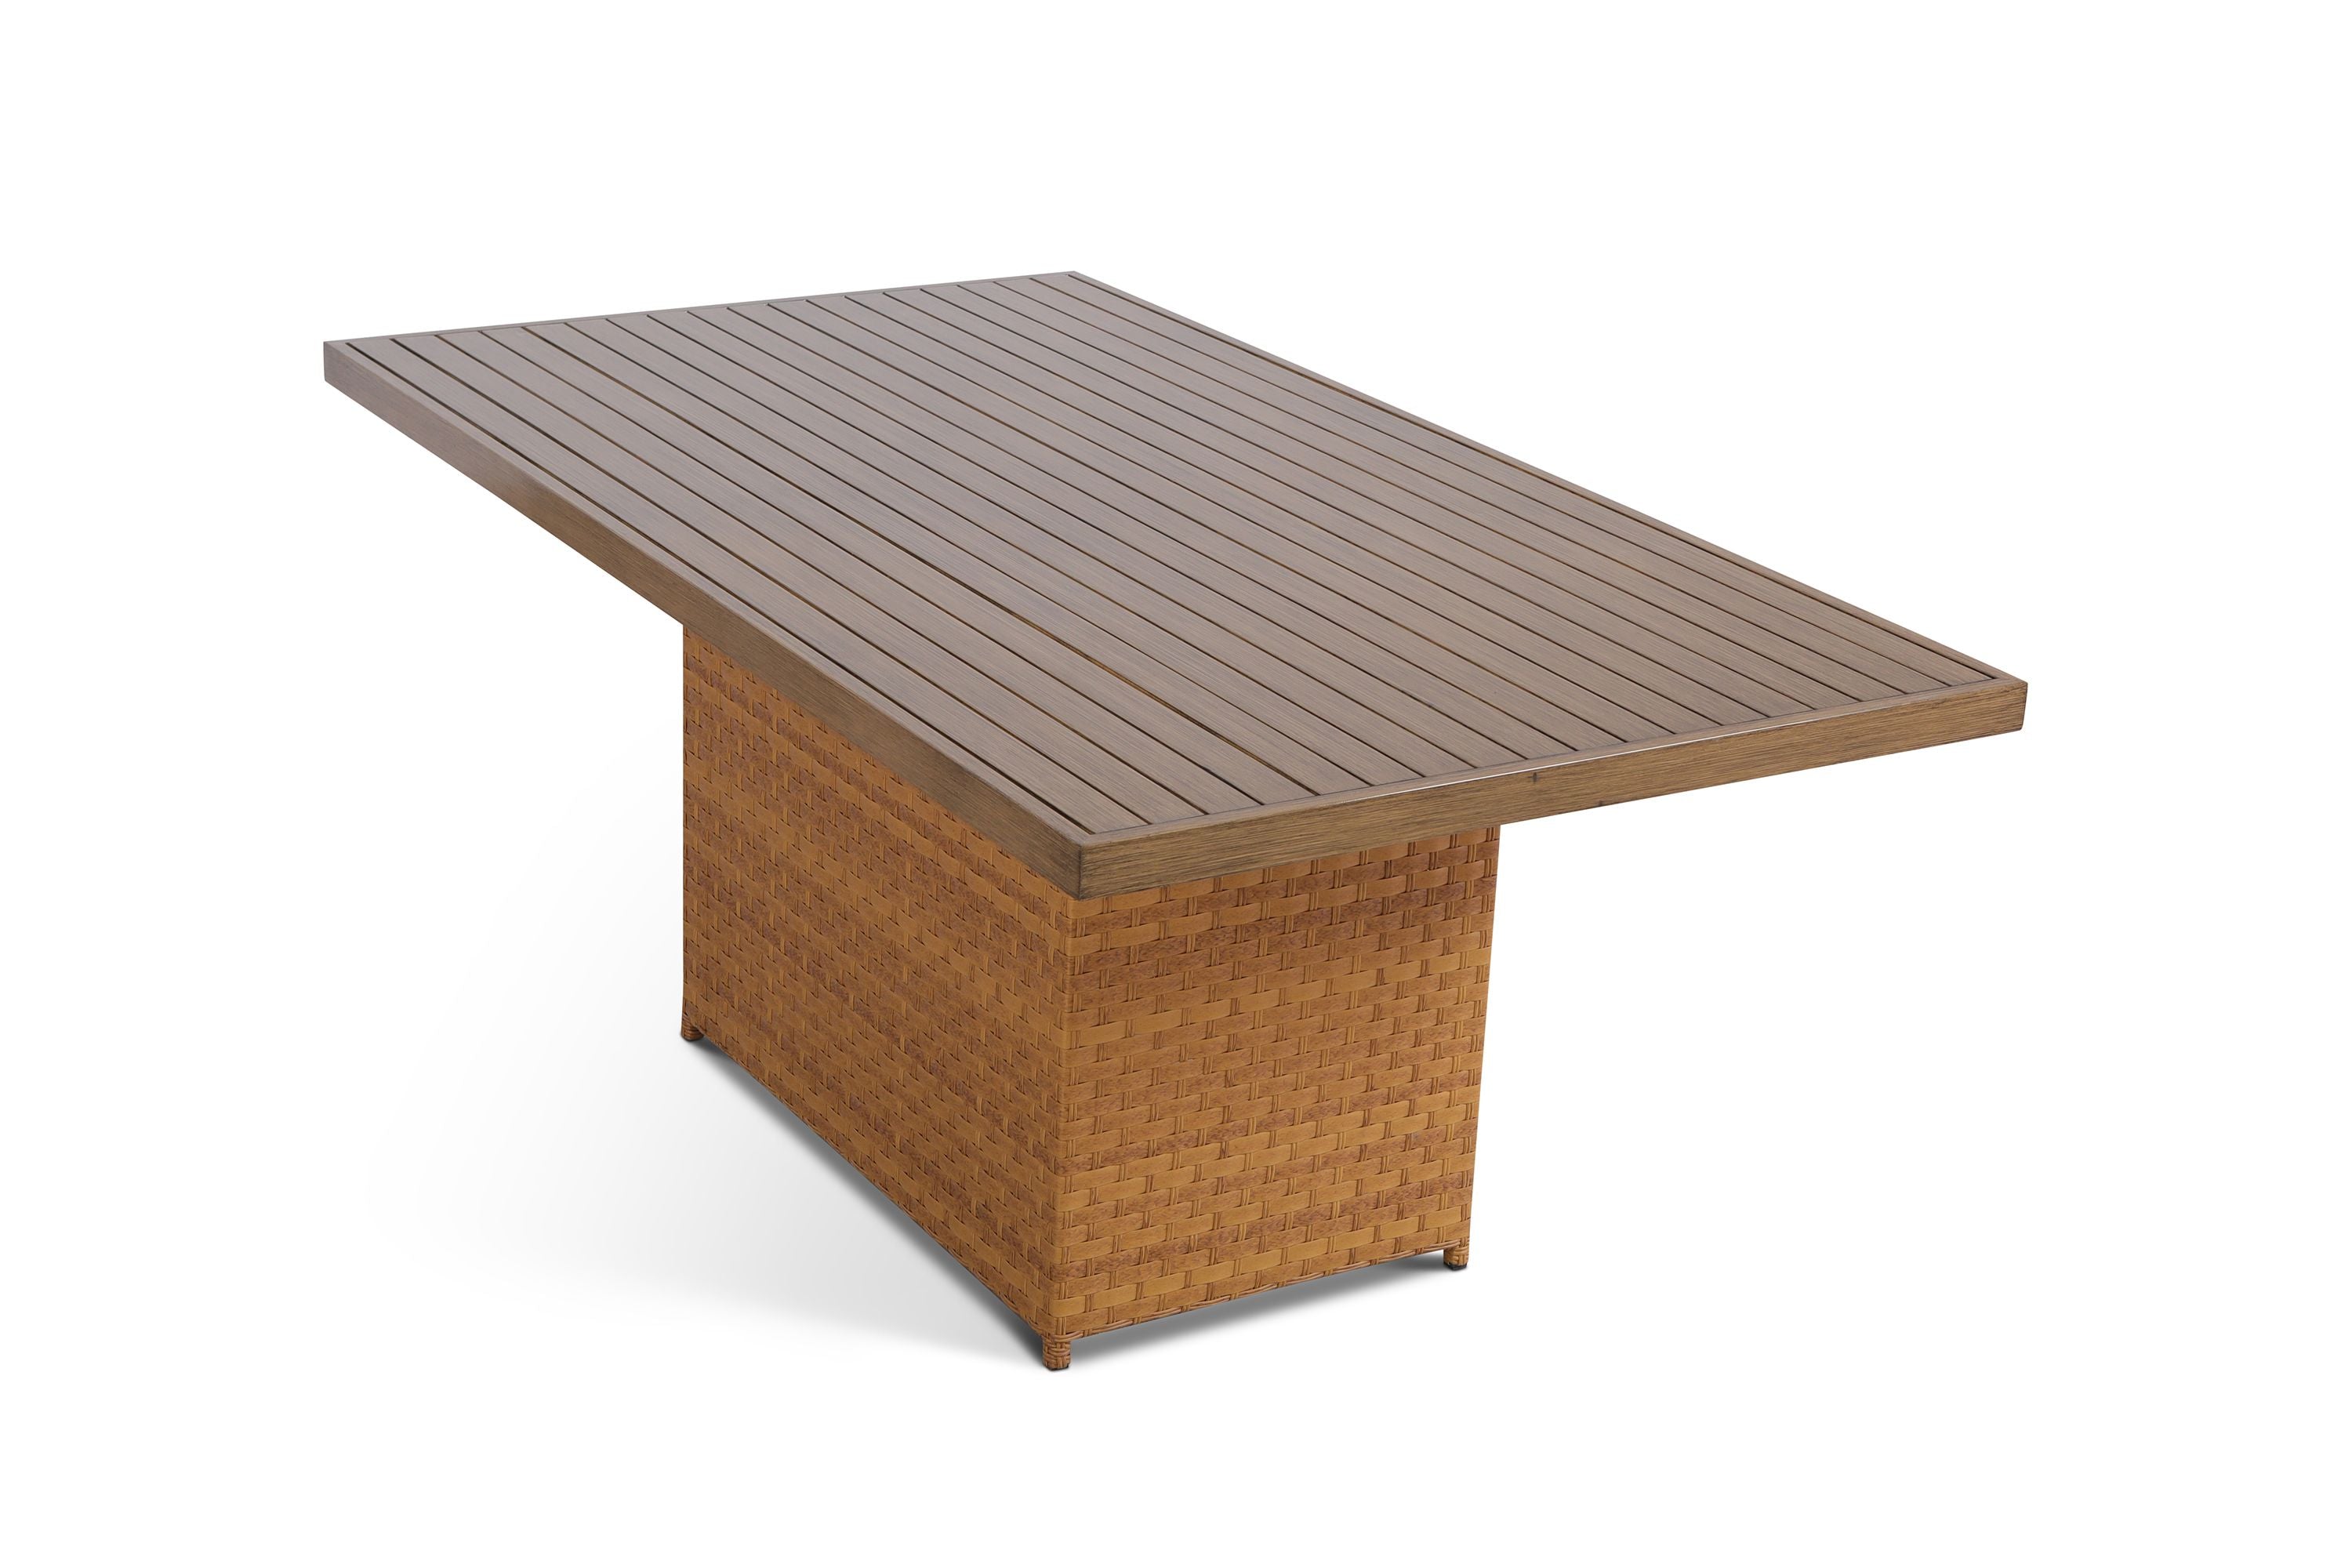 Seabrook Rectangle Outdoor Wicker Dining Table